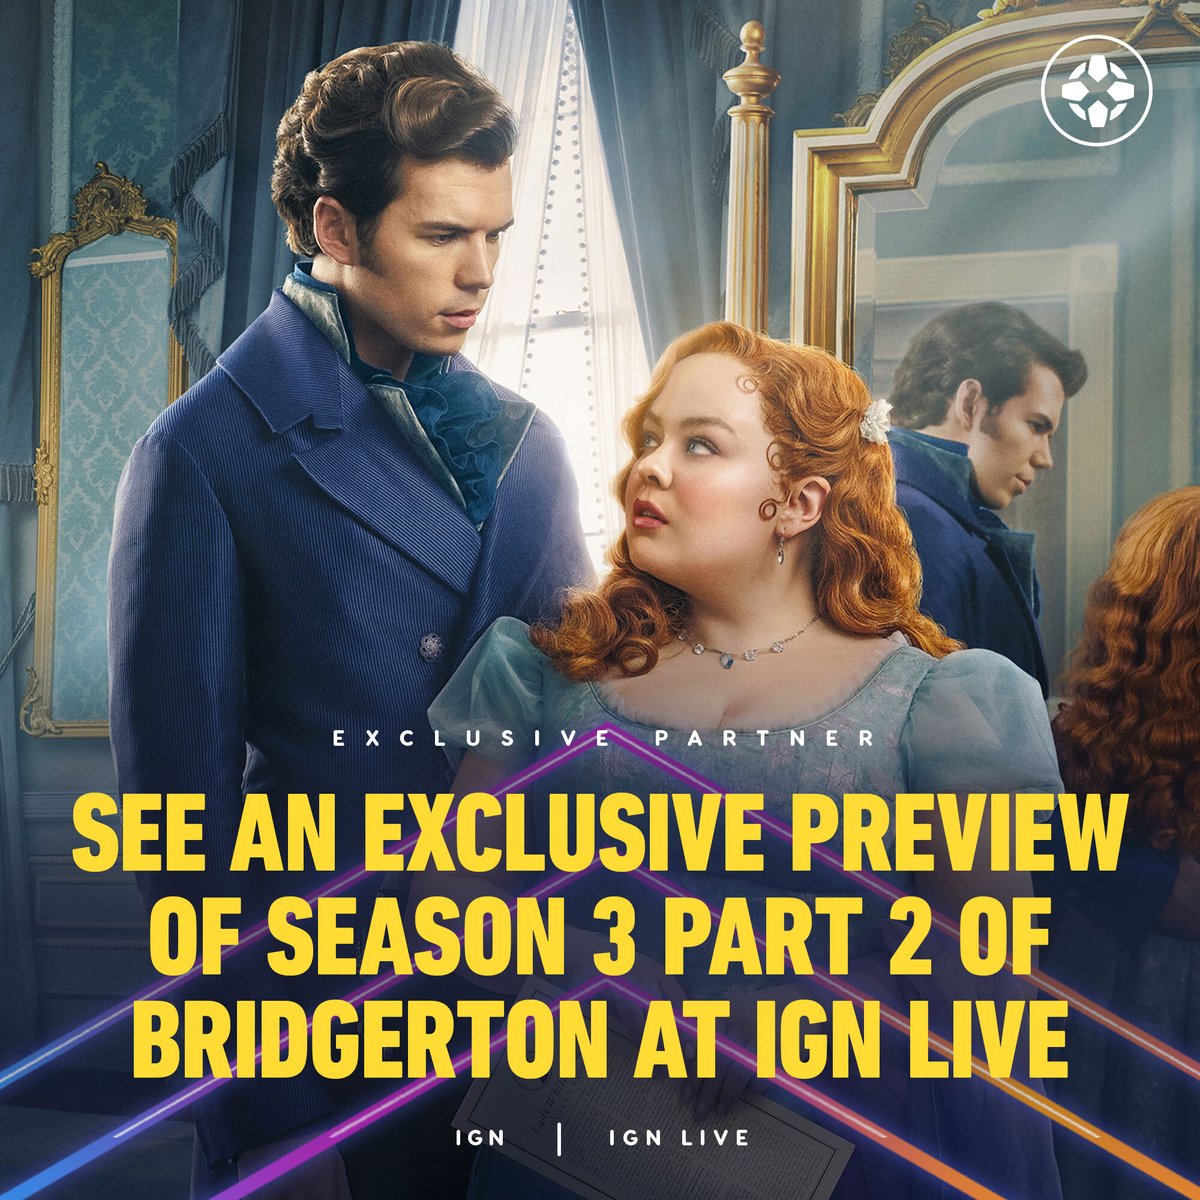 Make sure to grab your Pen for an exclusive sneak peek of Bridgerton Season 3, Part 2! Where will Penelope and Colin go from here? Only time will tell… bit.ly/3UC6XZm #IGNLive